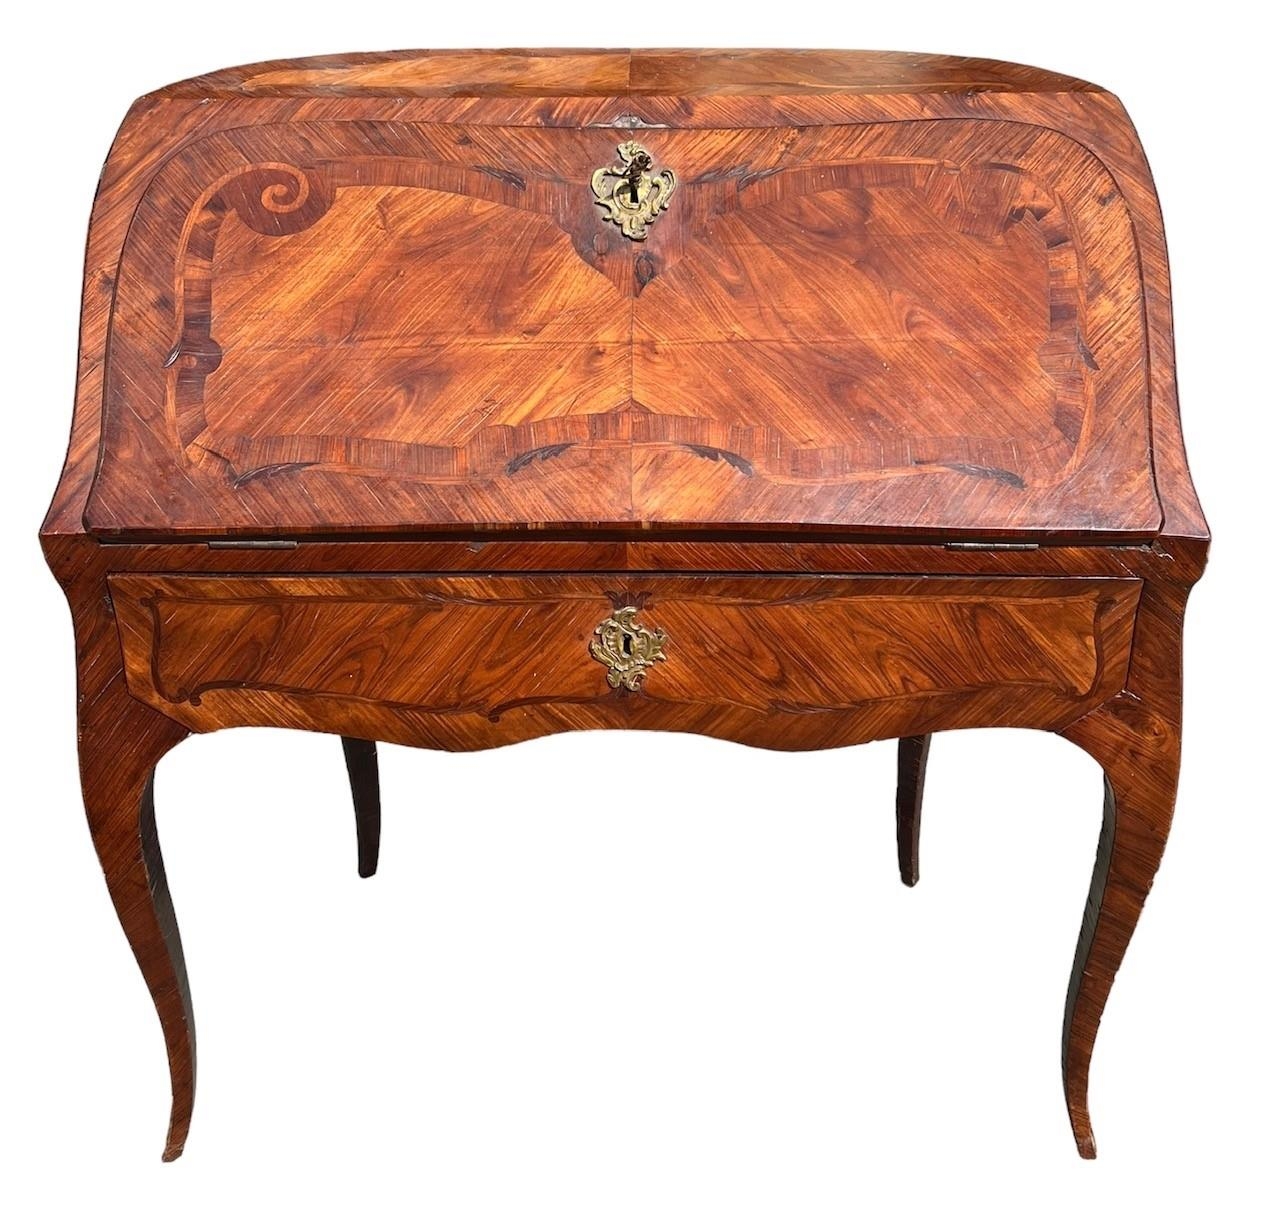 ATTRIBUTED TO FRANÇOIS AND PIERRE GARNIER, AN 18TH CENTURY FRENCH LOUIS XV TULIPWOOD AND INLAID